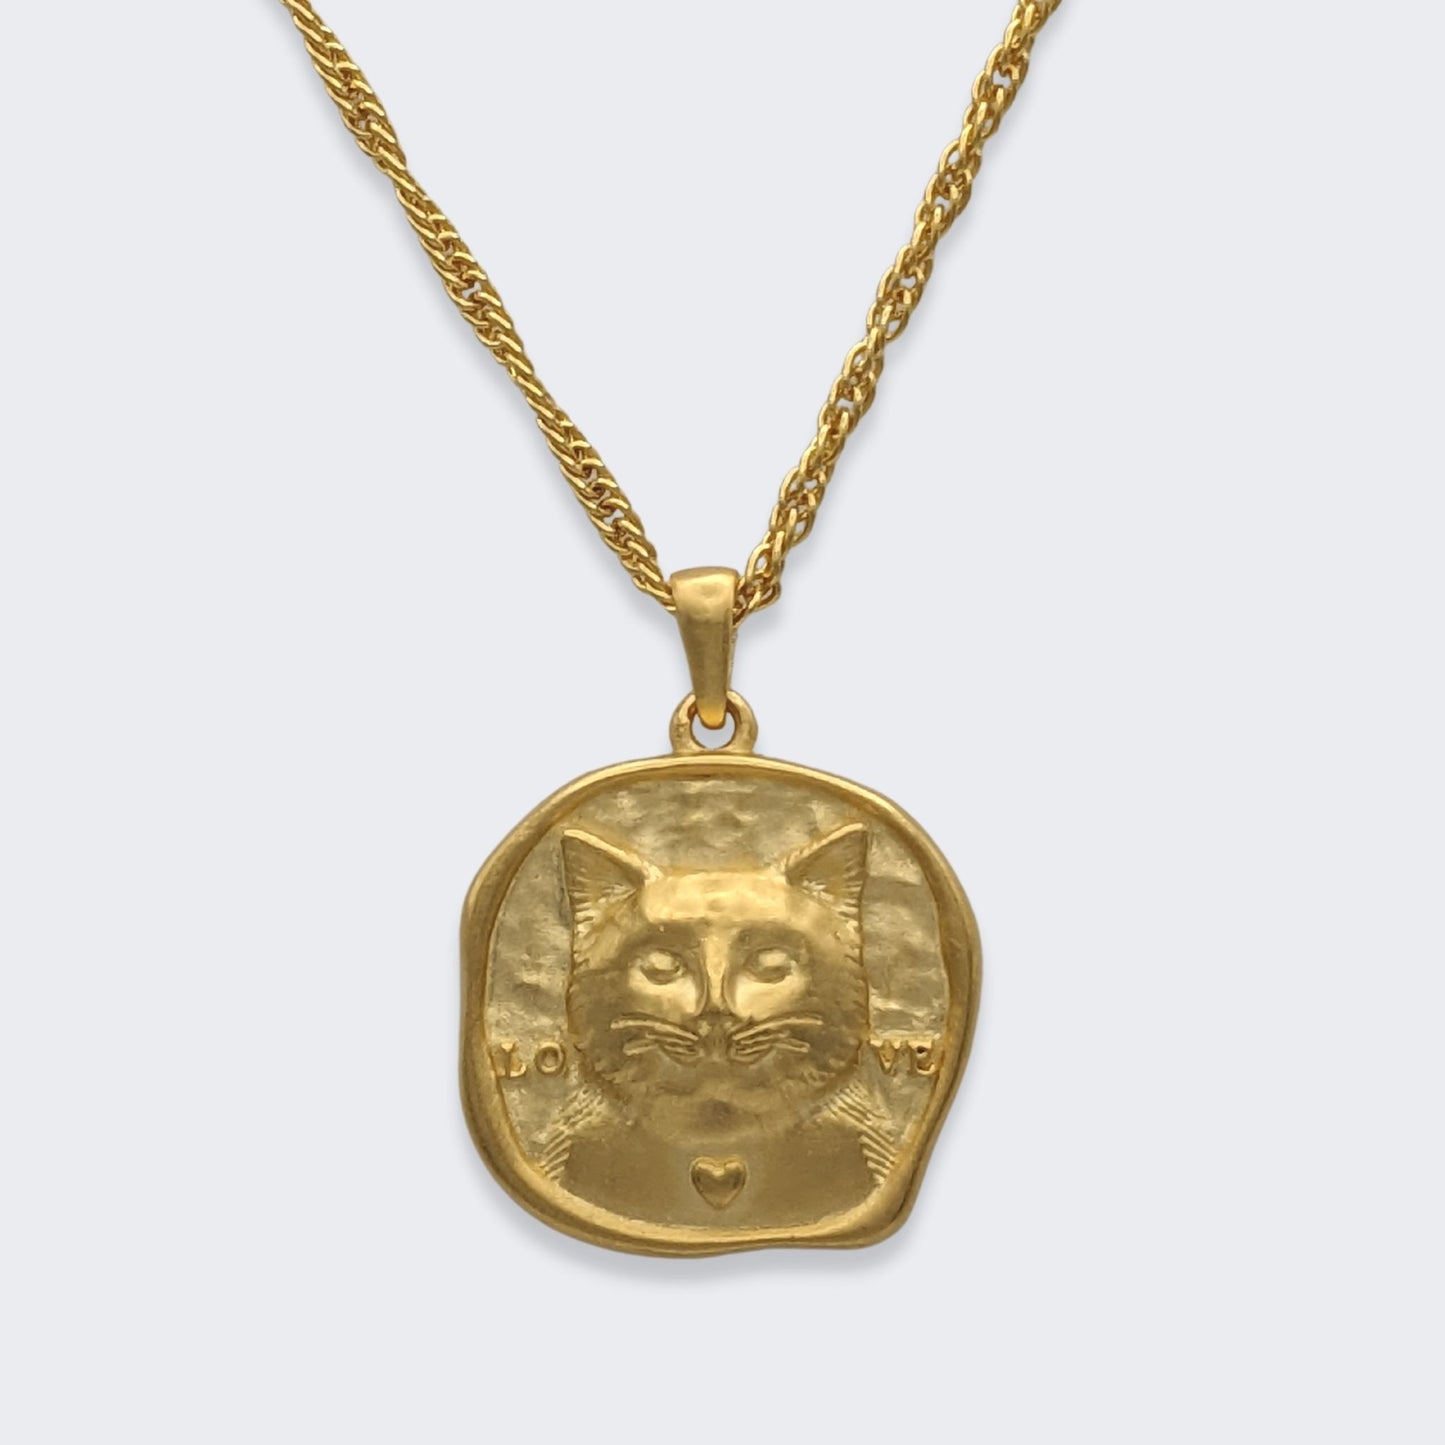 lars reversible cat coin necklace in 18k gold vermeil (front view)